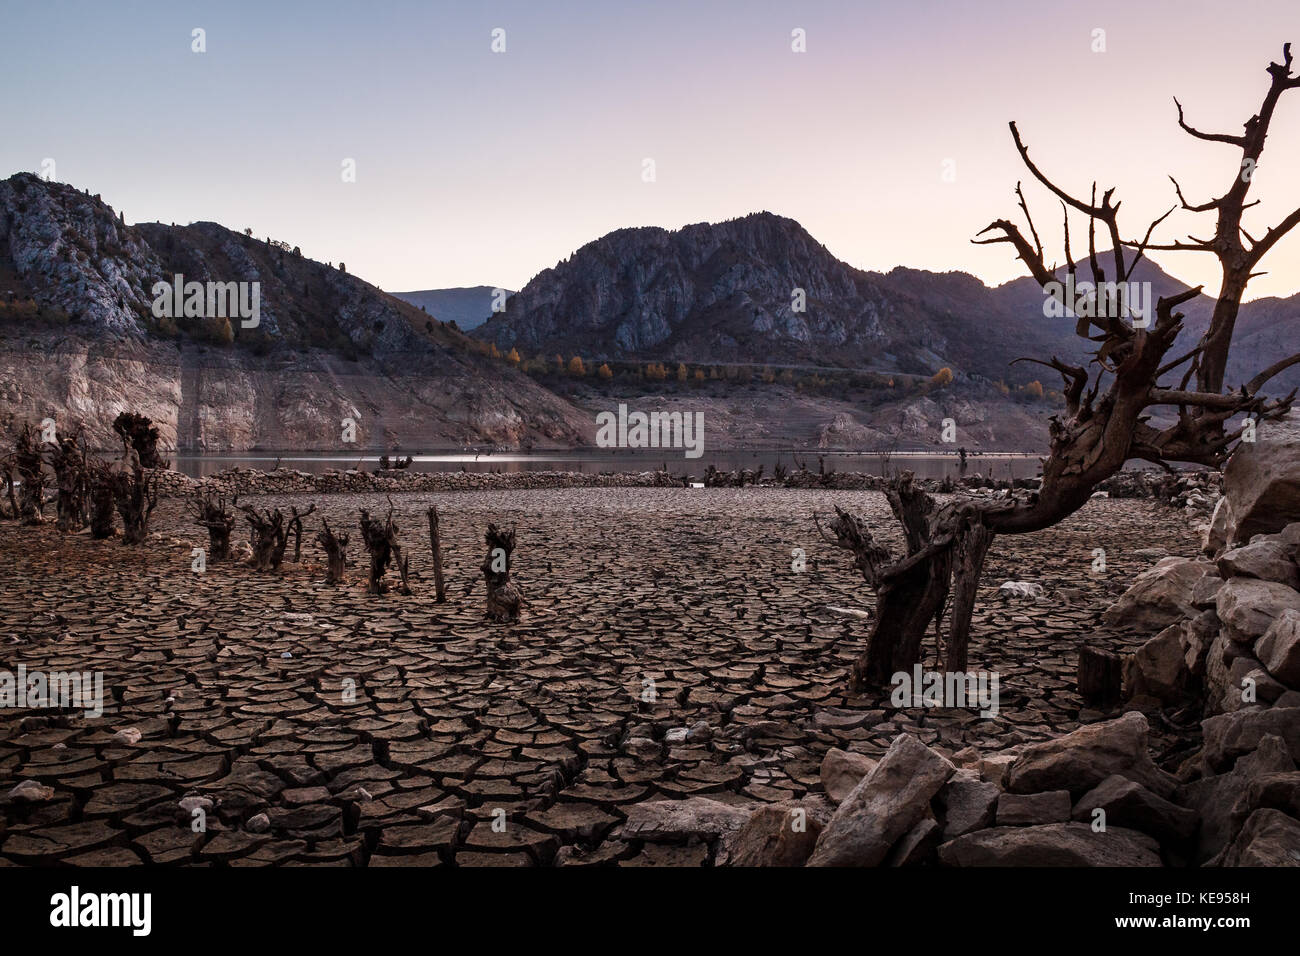 Portraying the drought in northern Spain, by a dry reservoir near Leon, with a shocking cracked soil and dead trees previously covered with water. Stock Photo